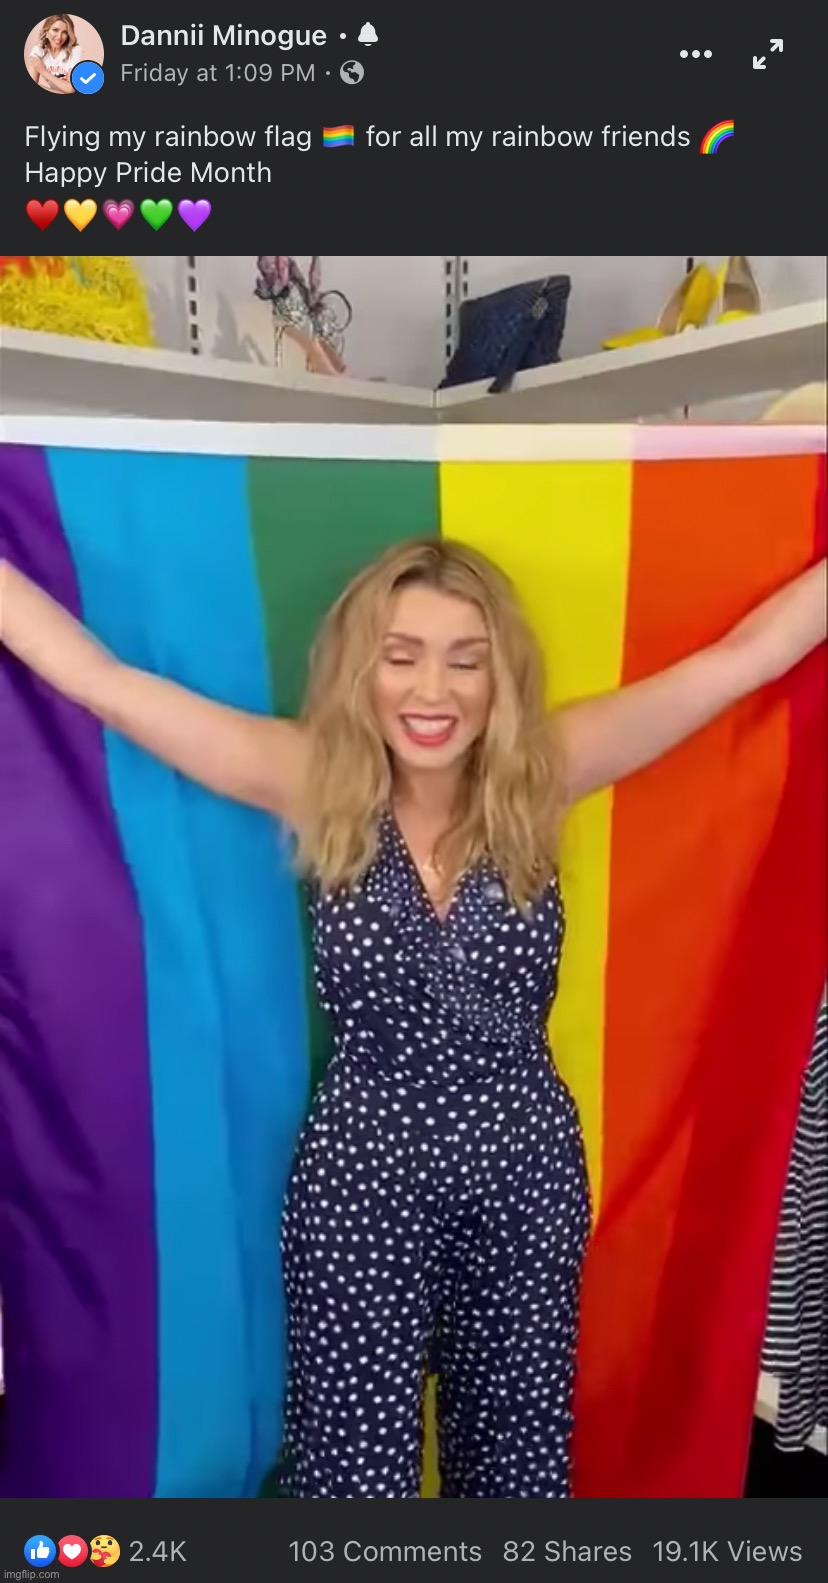 Happy Pride Month all!! | image tagged in dannii pride month,dannii minogue,pride month,gay pride,pride,lgbtq | made w/ Imgflip meme maker